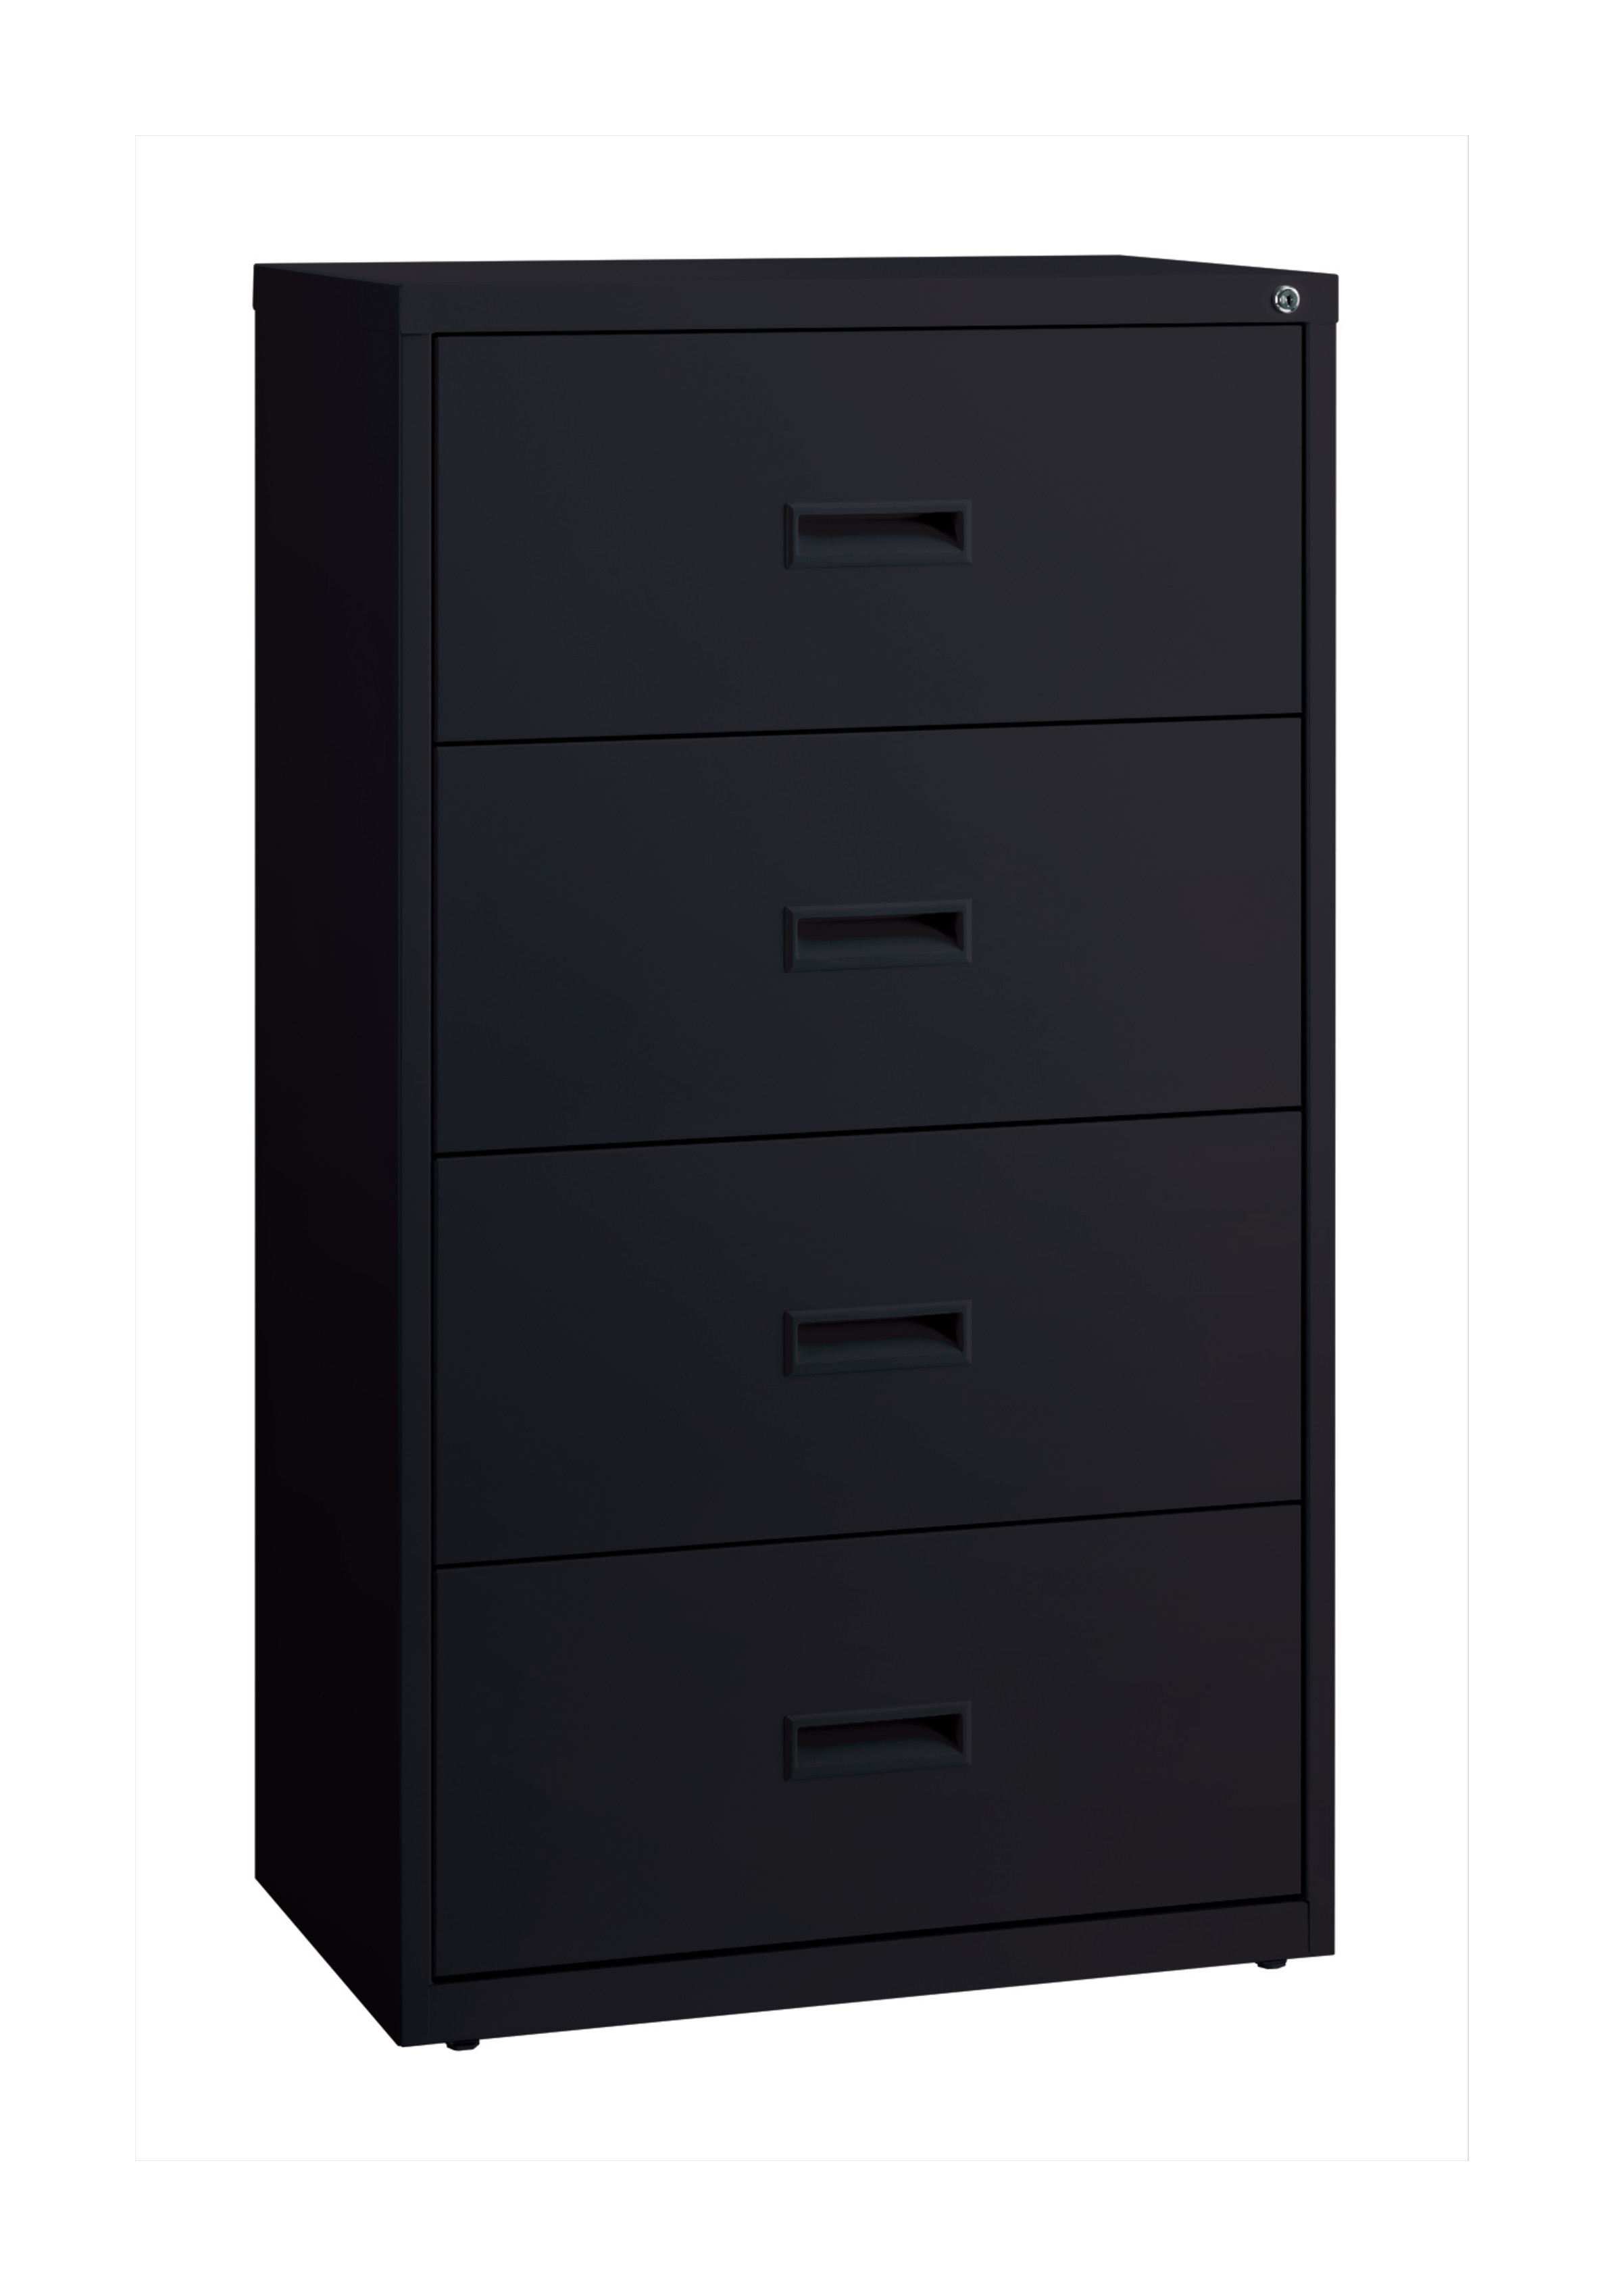 Hirsh 30 Inch Wide 4 Drawer Metal Lateral File Cabinet for Home and Office, Holds Letter, Legal and A4 Hanging Folders, Black - image 1 of 4